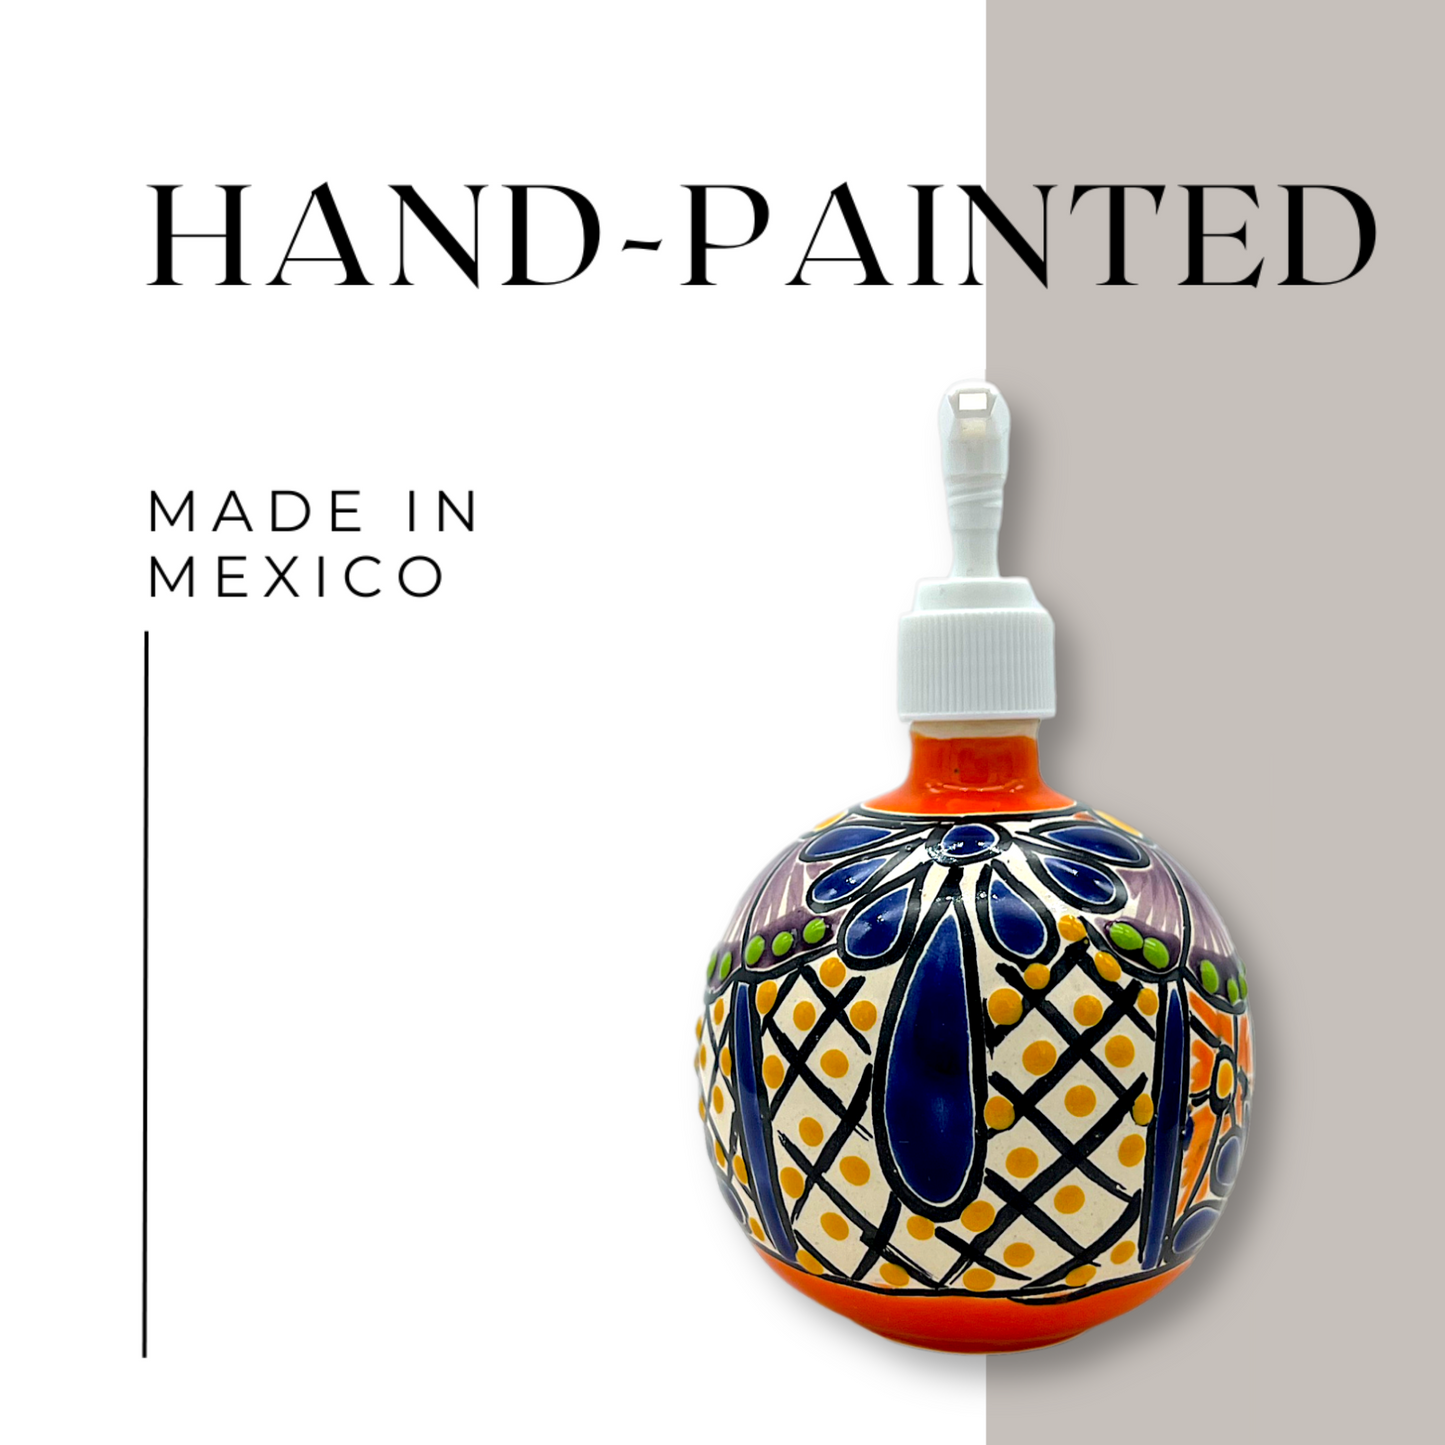 hand painted in mexico Hand-painted Talavera Ceramic Soap Dispenser in vibrant colors, an artistic addition to kitchen or bathroom.